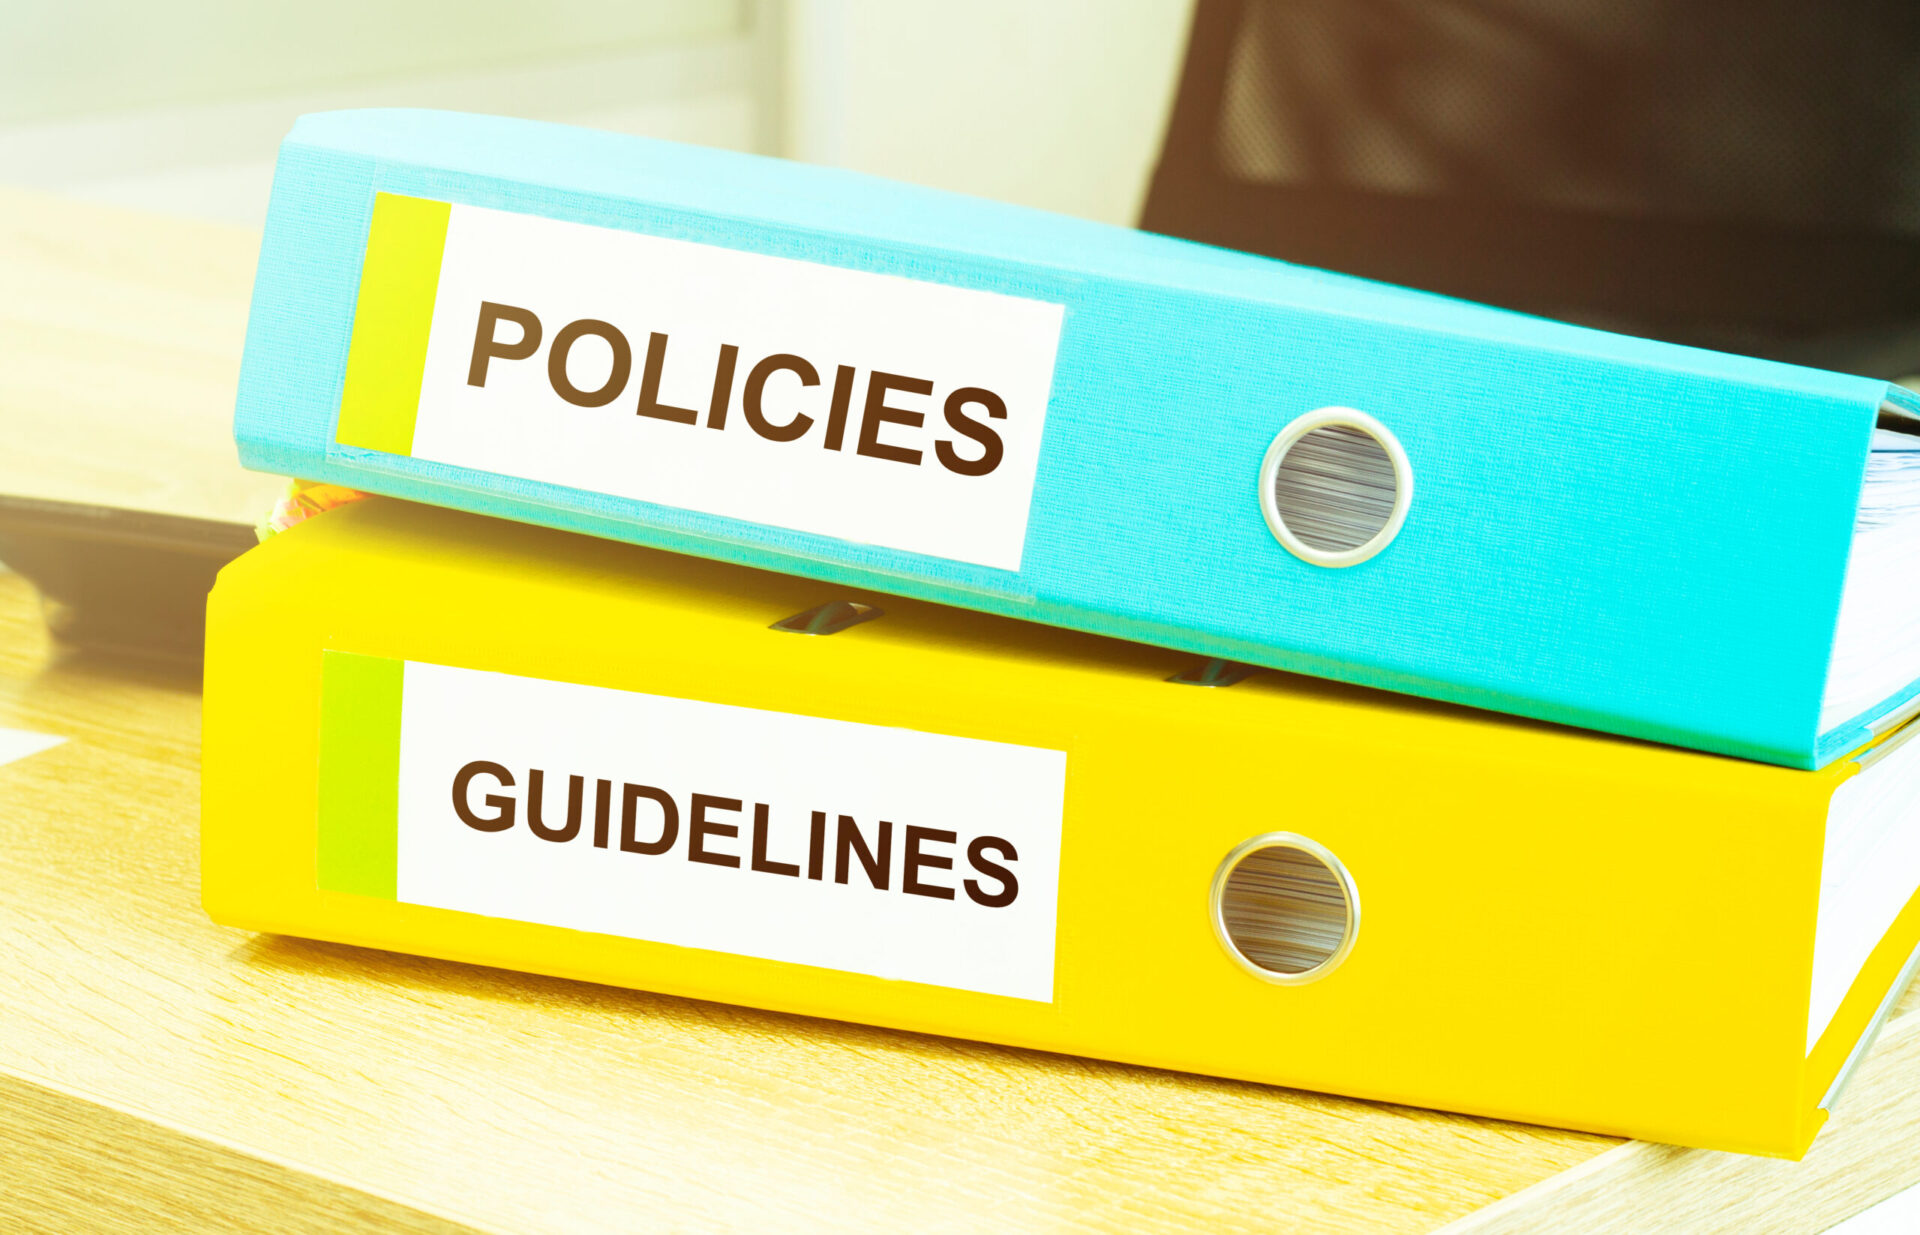 A blue binder that reads "Policies", lays over a yellow binder that reads "Guidelines". Both binders sit on top of a desk.